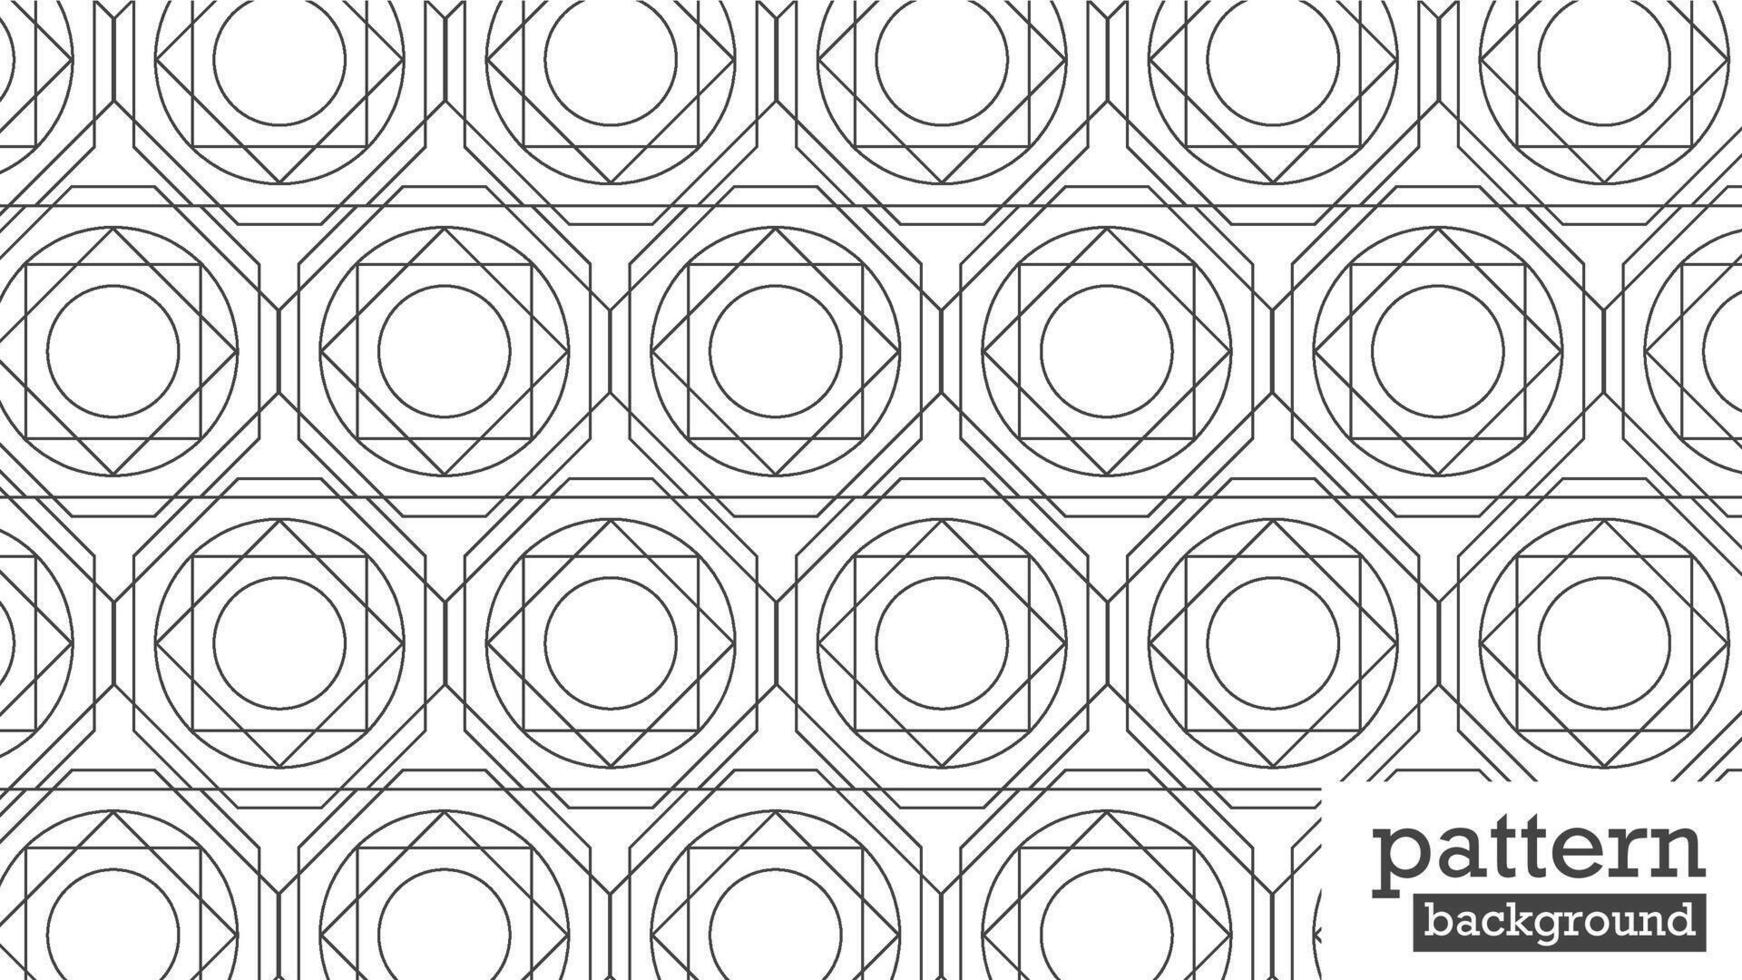 This is a geometric, abstract line seamless pattern in black on a white background. illustration. monochrome and modern style. vector